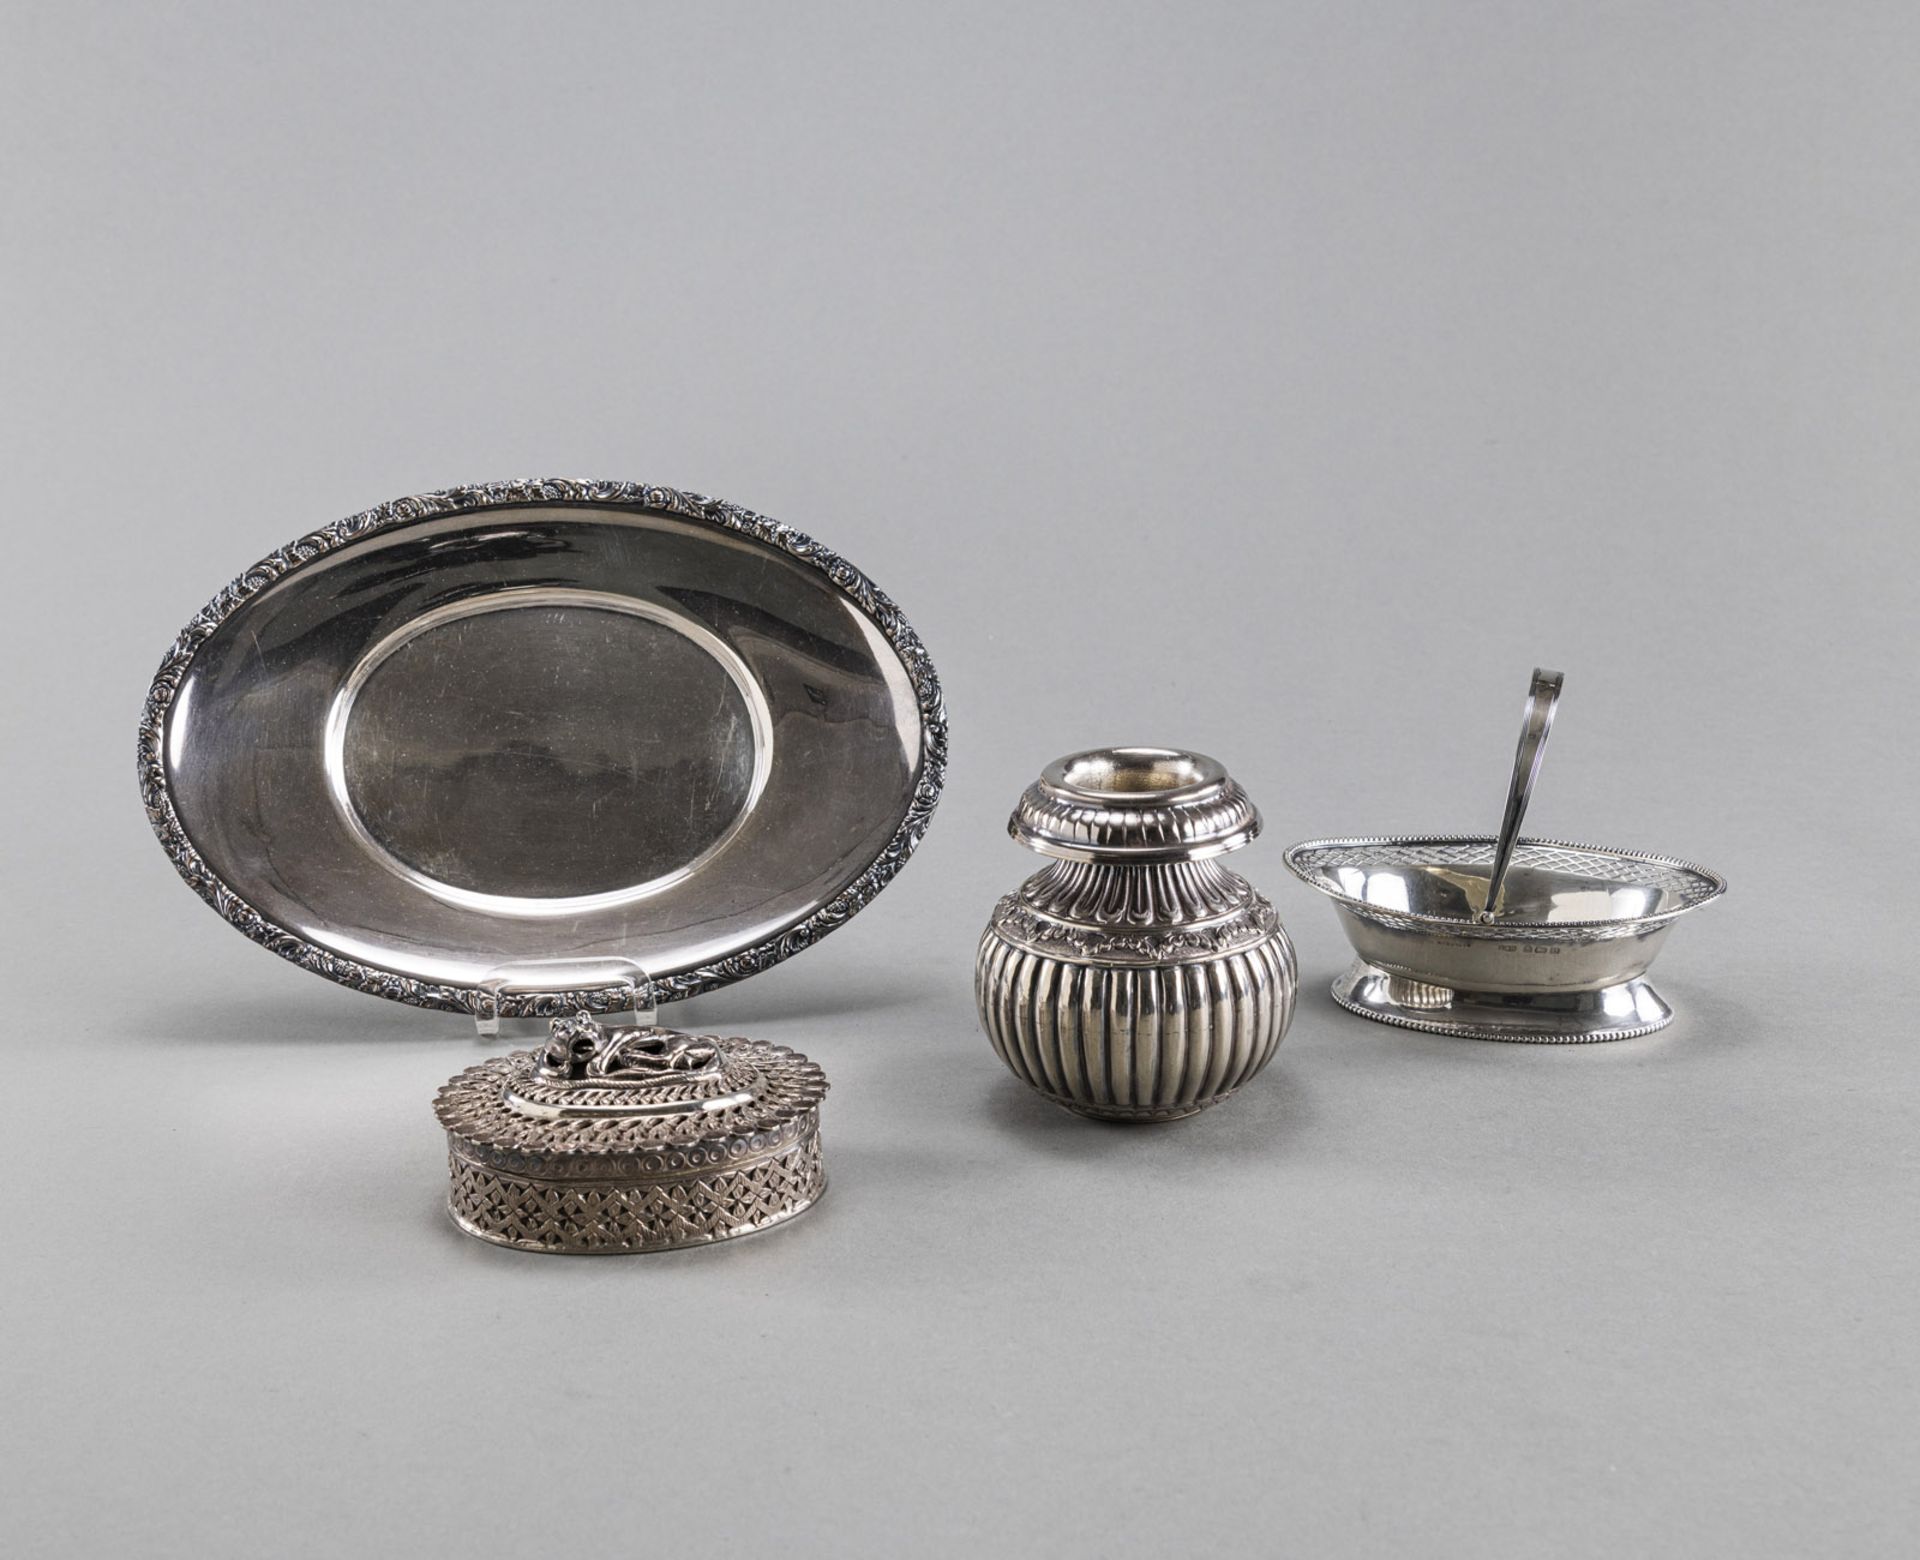 A MIXED LOT OF A SILVER VASE, A SMALL BOX, A BASKET AND A TRAY